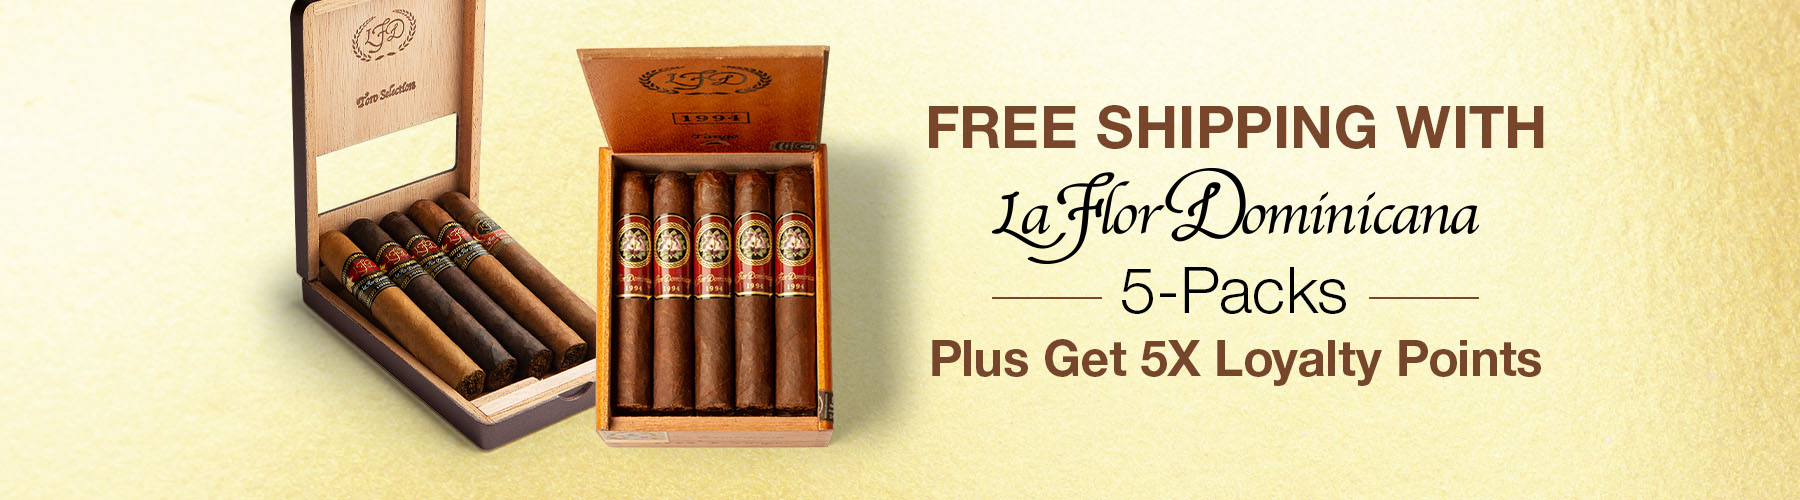 Free Shipping with La Flor Dominicana 5-Packs Plus get 5X Loyalty Points